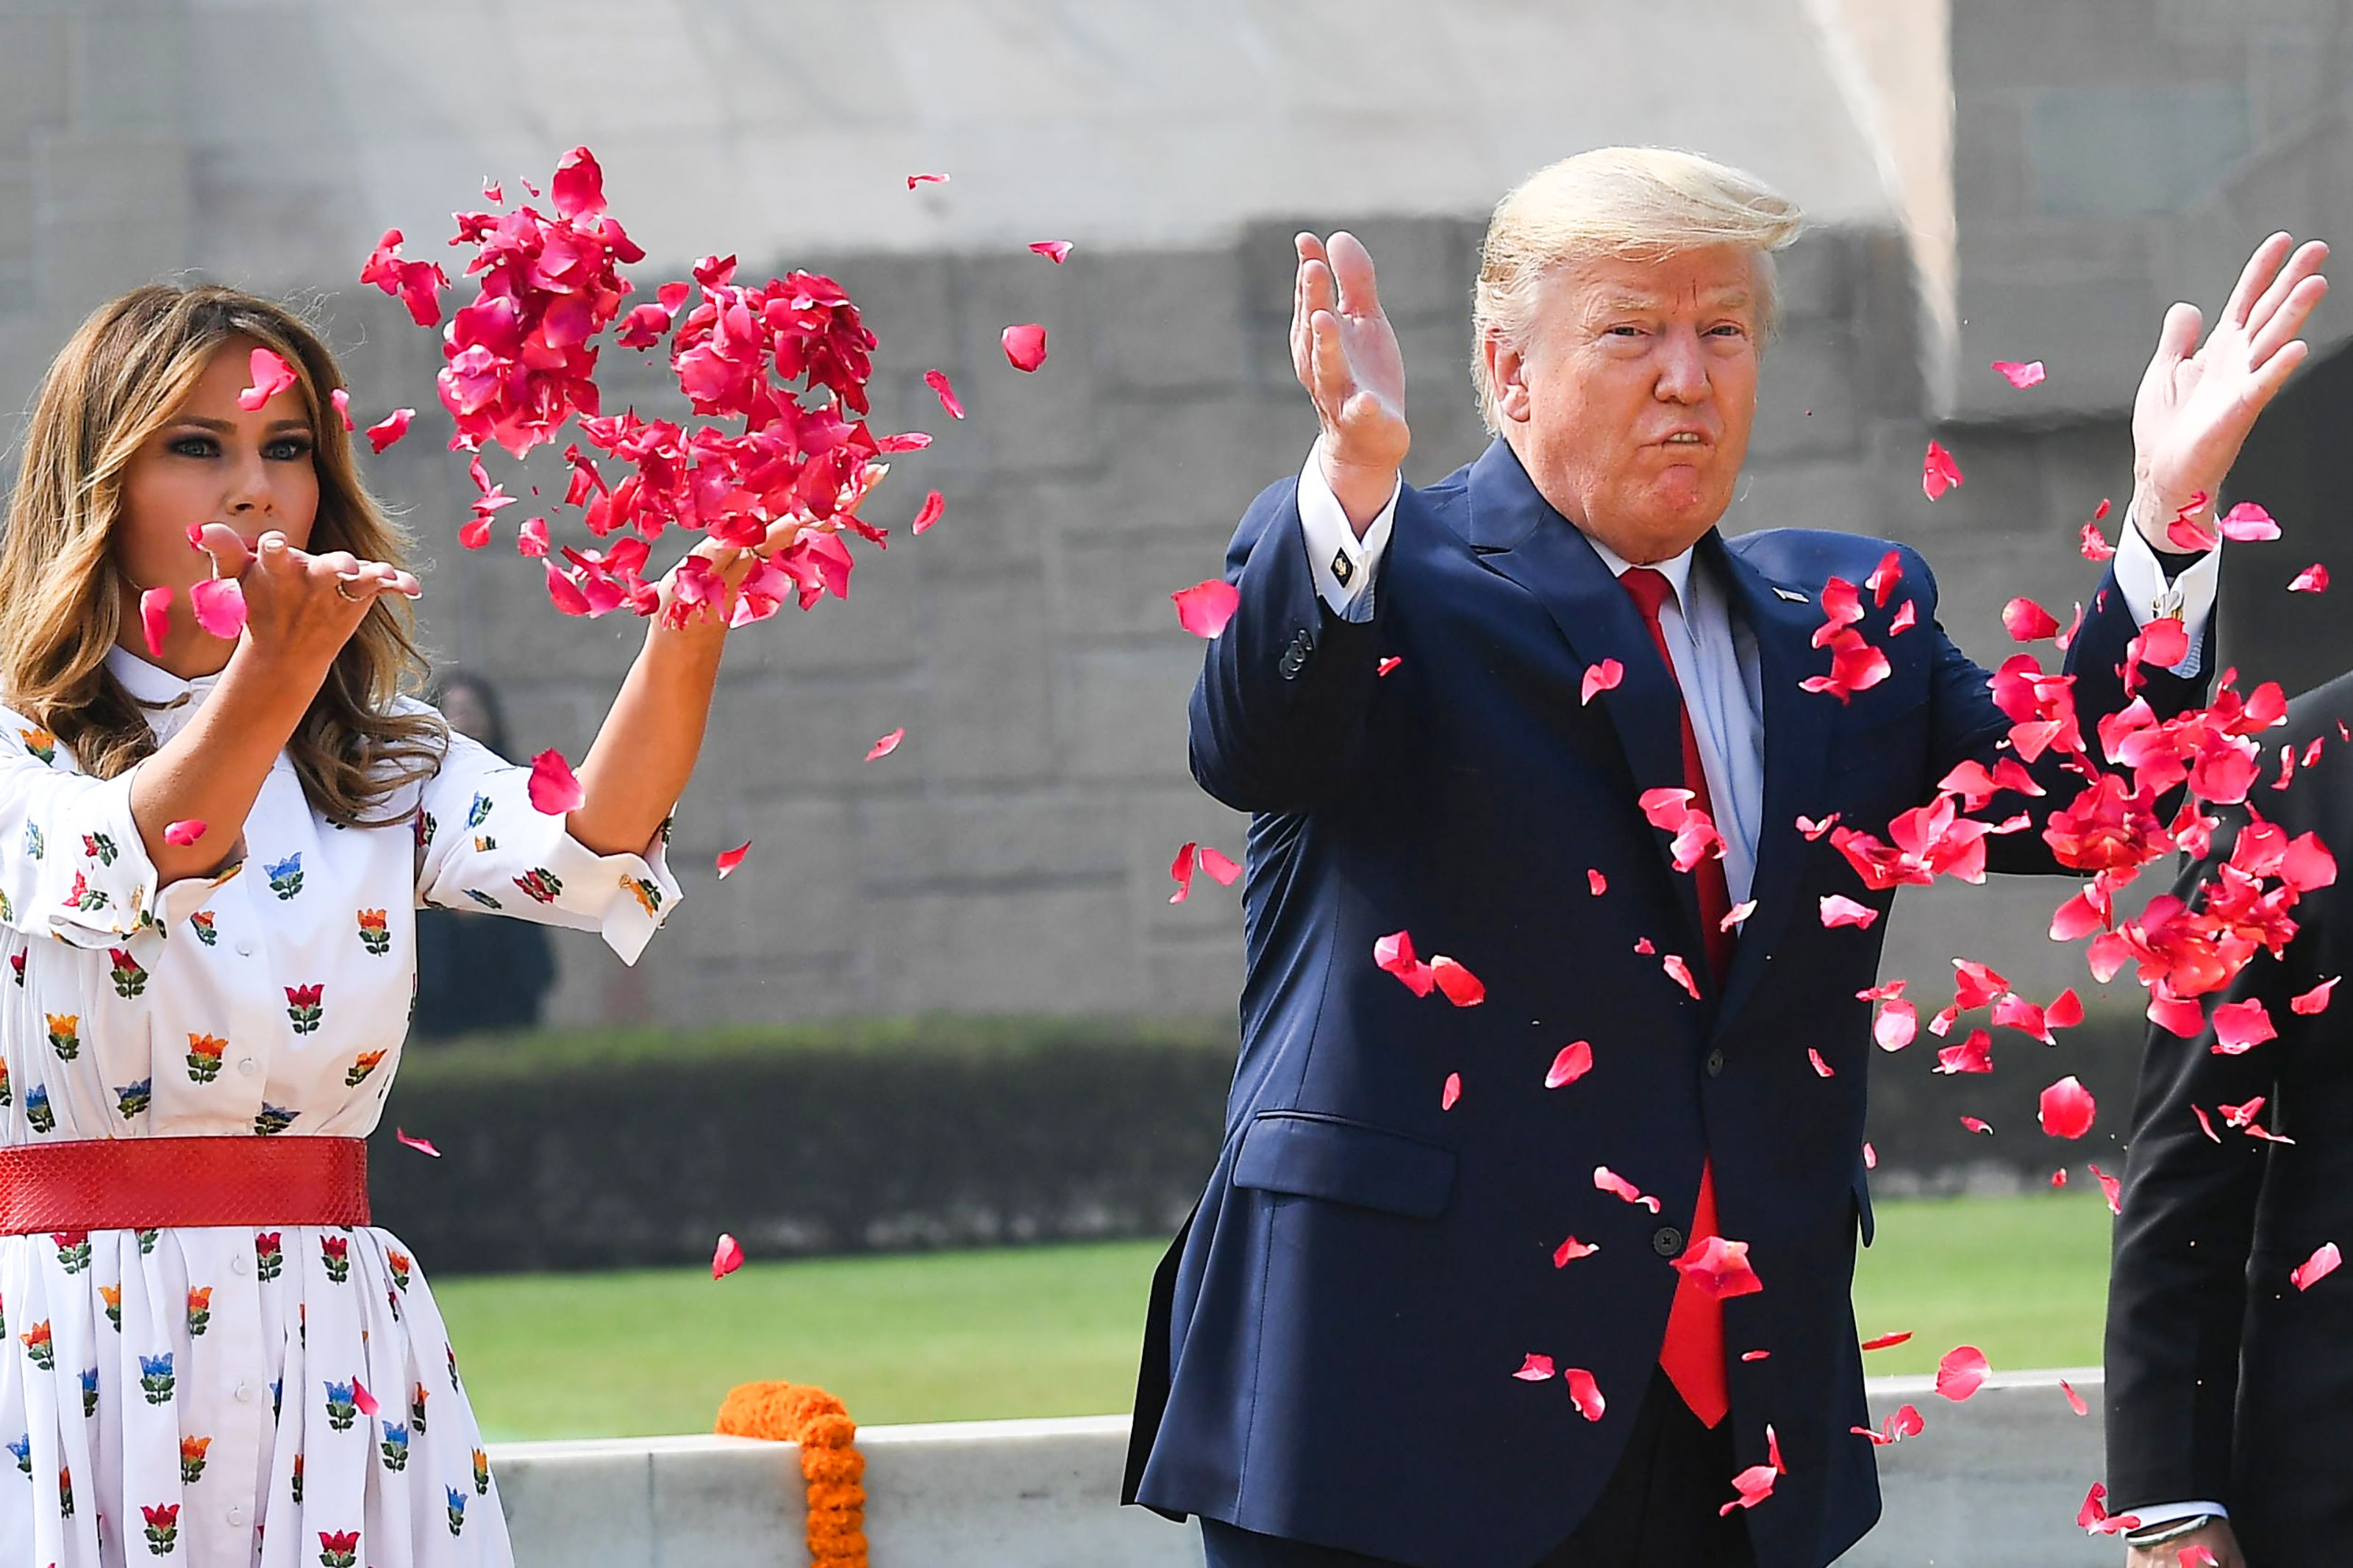 President Donald Trump and First Lady Melania Trump spray rose petals to pay tribute at Raj Ghat, the memorial for Indian independence icon Mahatma Gandhi, in New Delhi on February 25